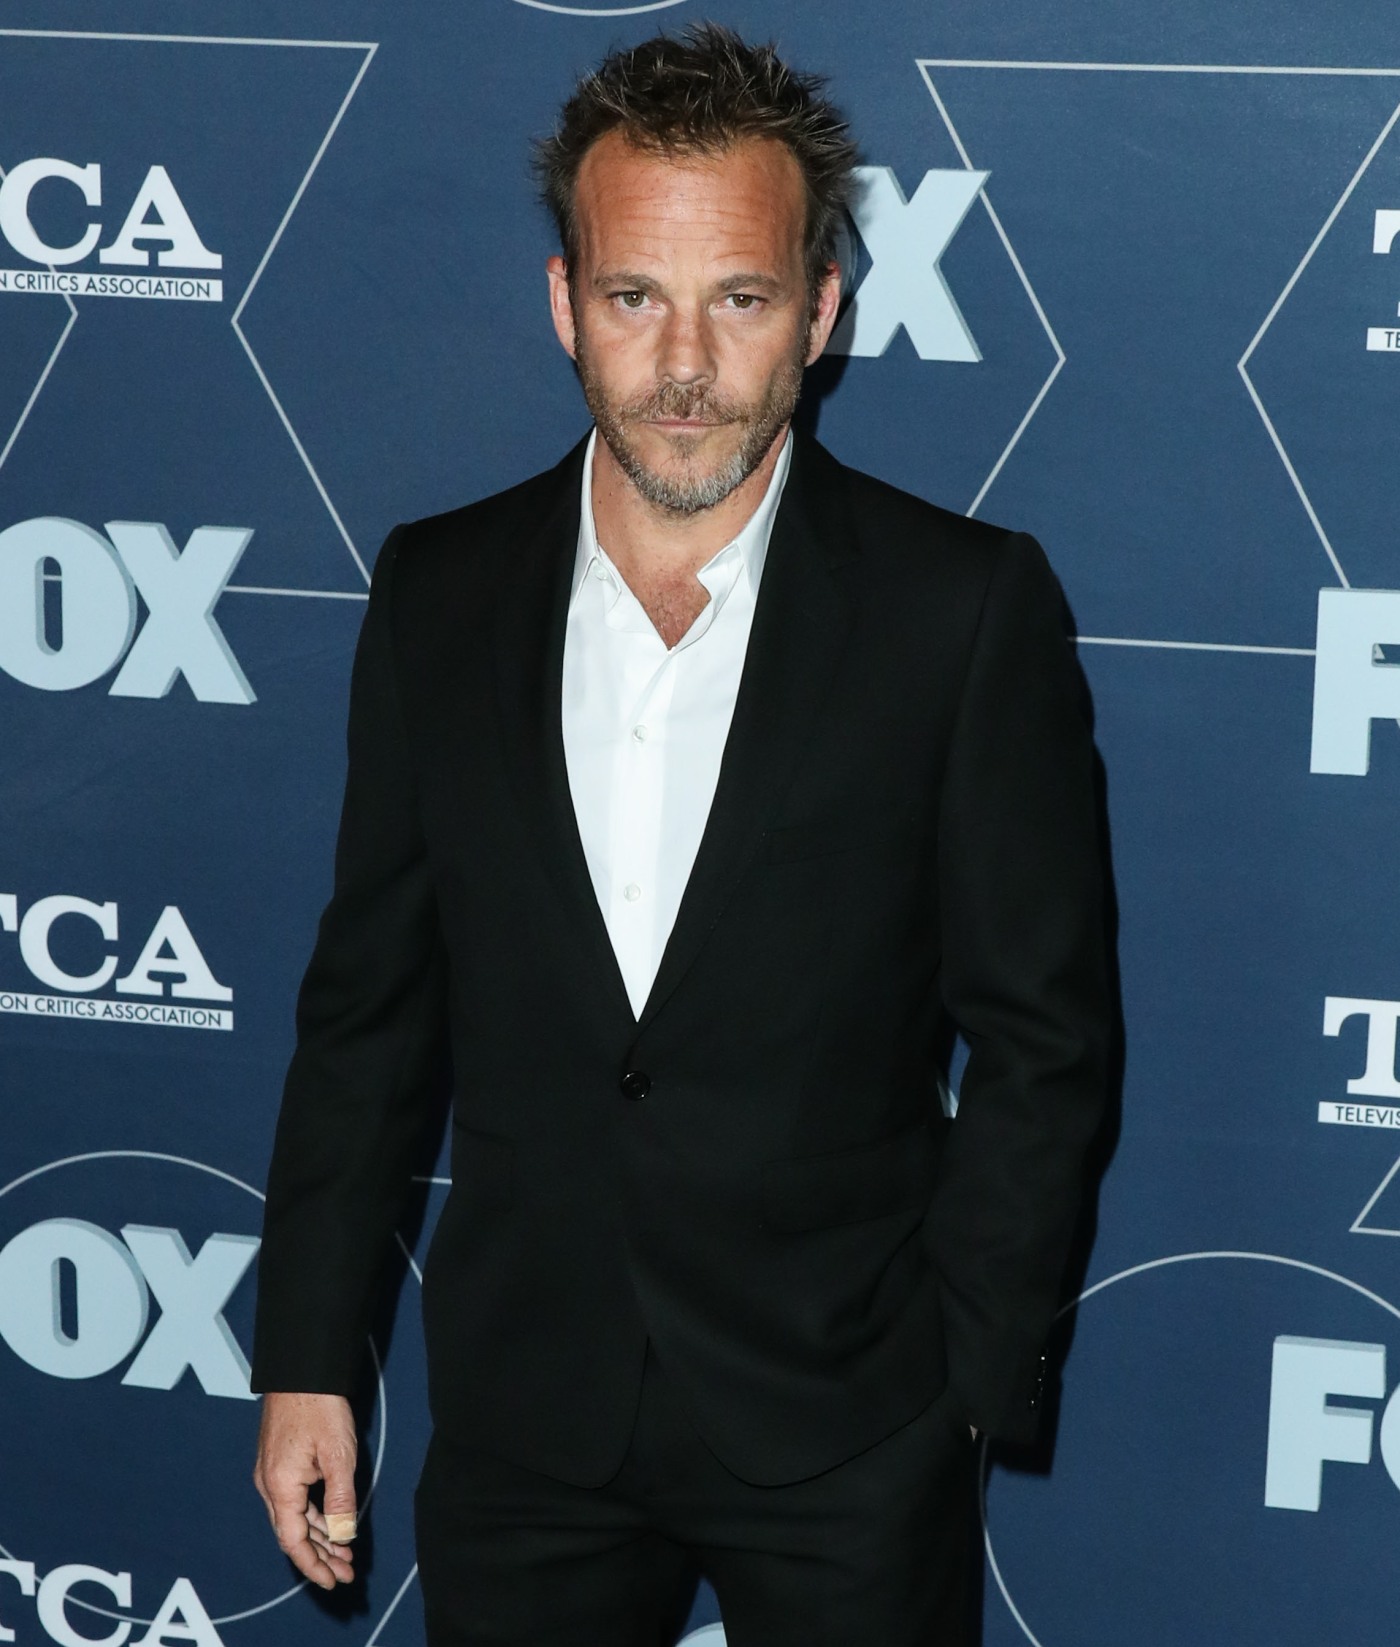 Stephen Dorff arrives at the FOX Winter TCA 2020 All-Star Party held at The Langham Huntington Hotel on January 7, 2020 in Pasadena, Los Angeles, California, United States.